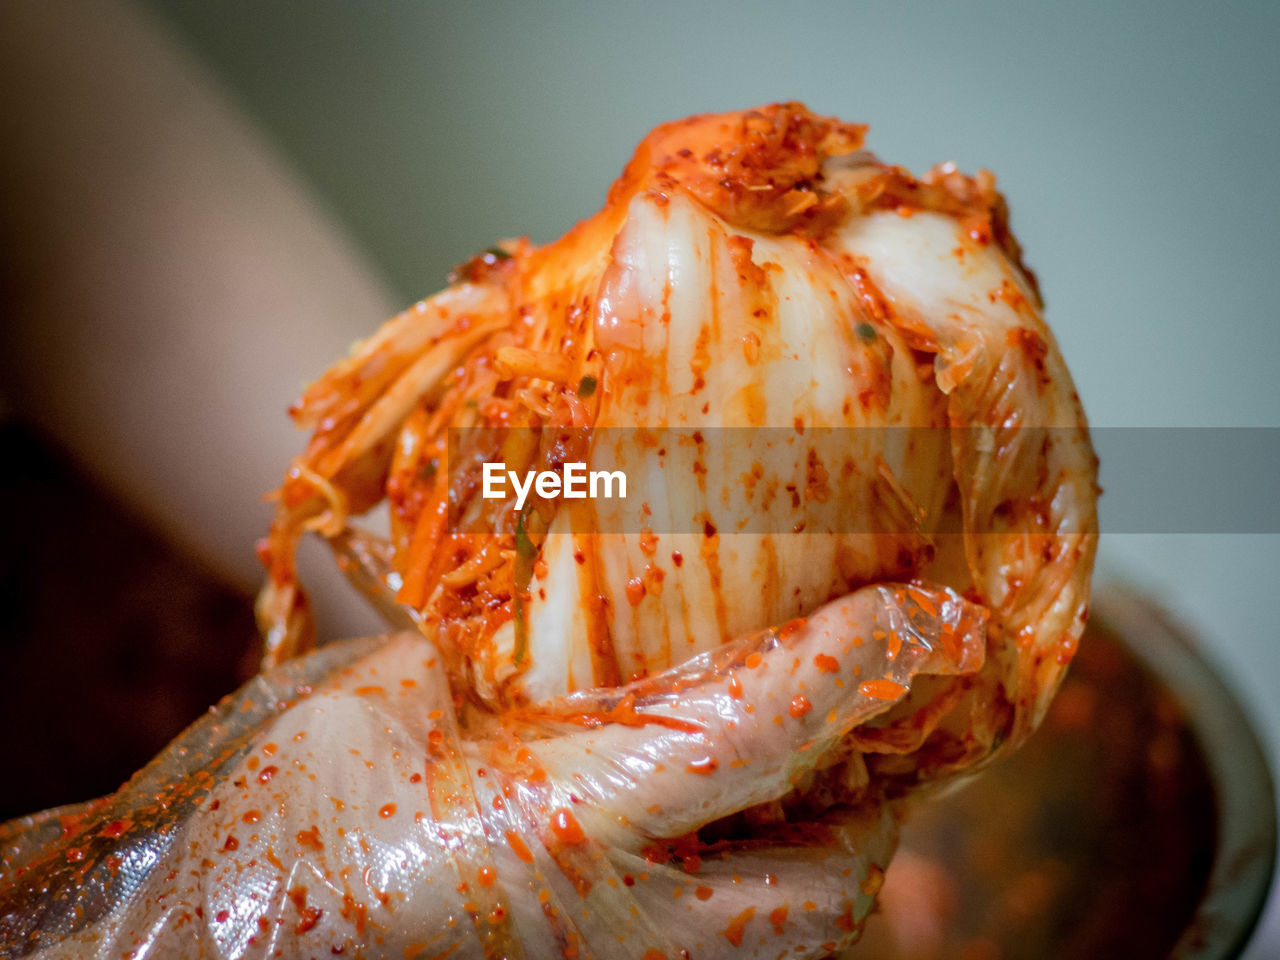 Cropped image of hands holding kimchi